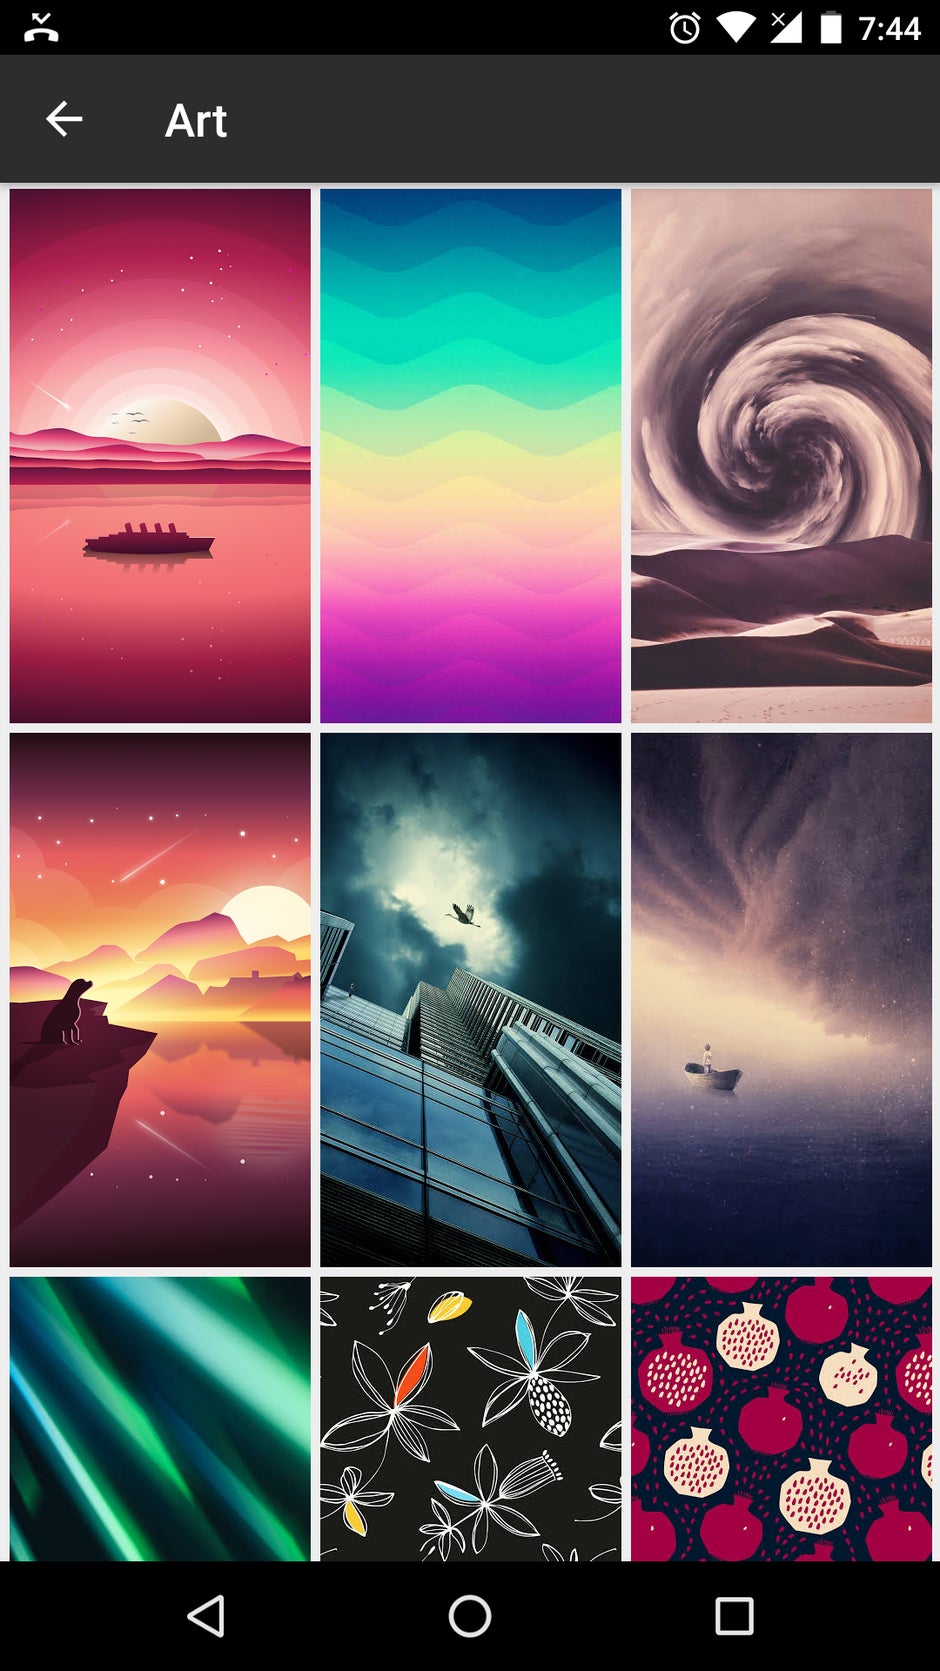 Google Wallpapers now offers new categories, more new wallpapers